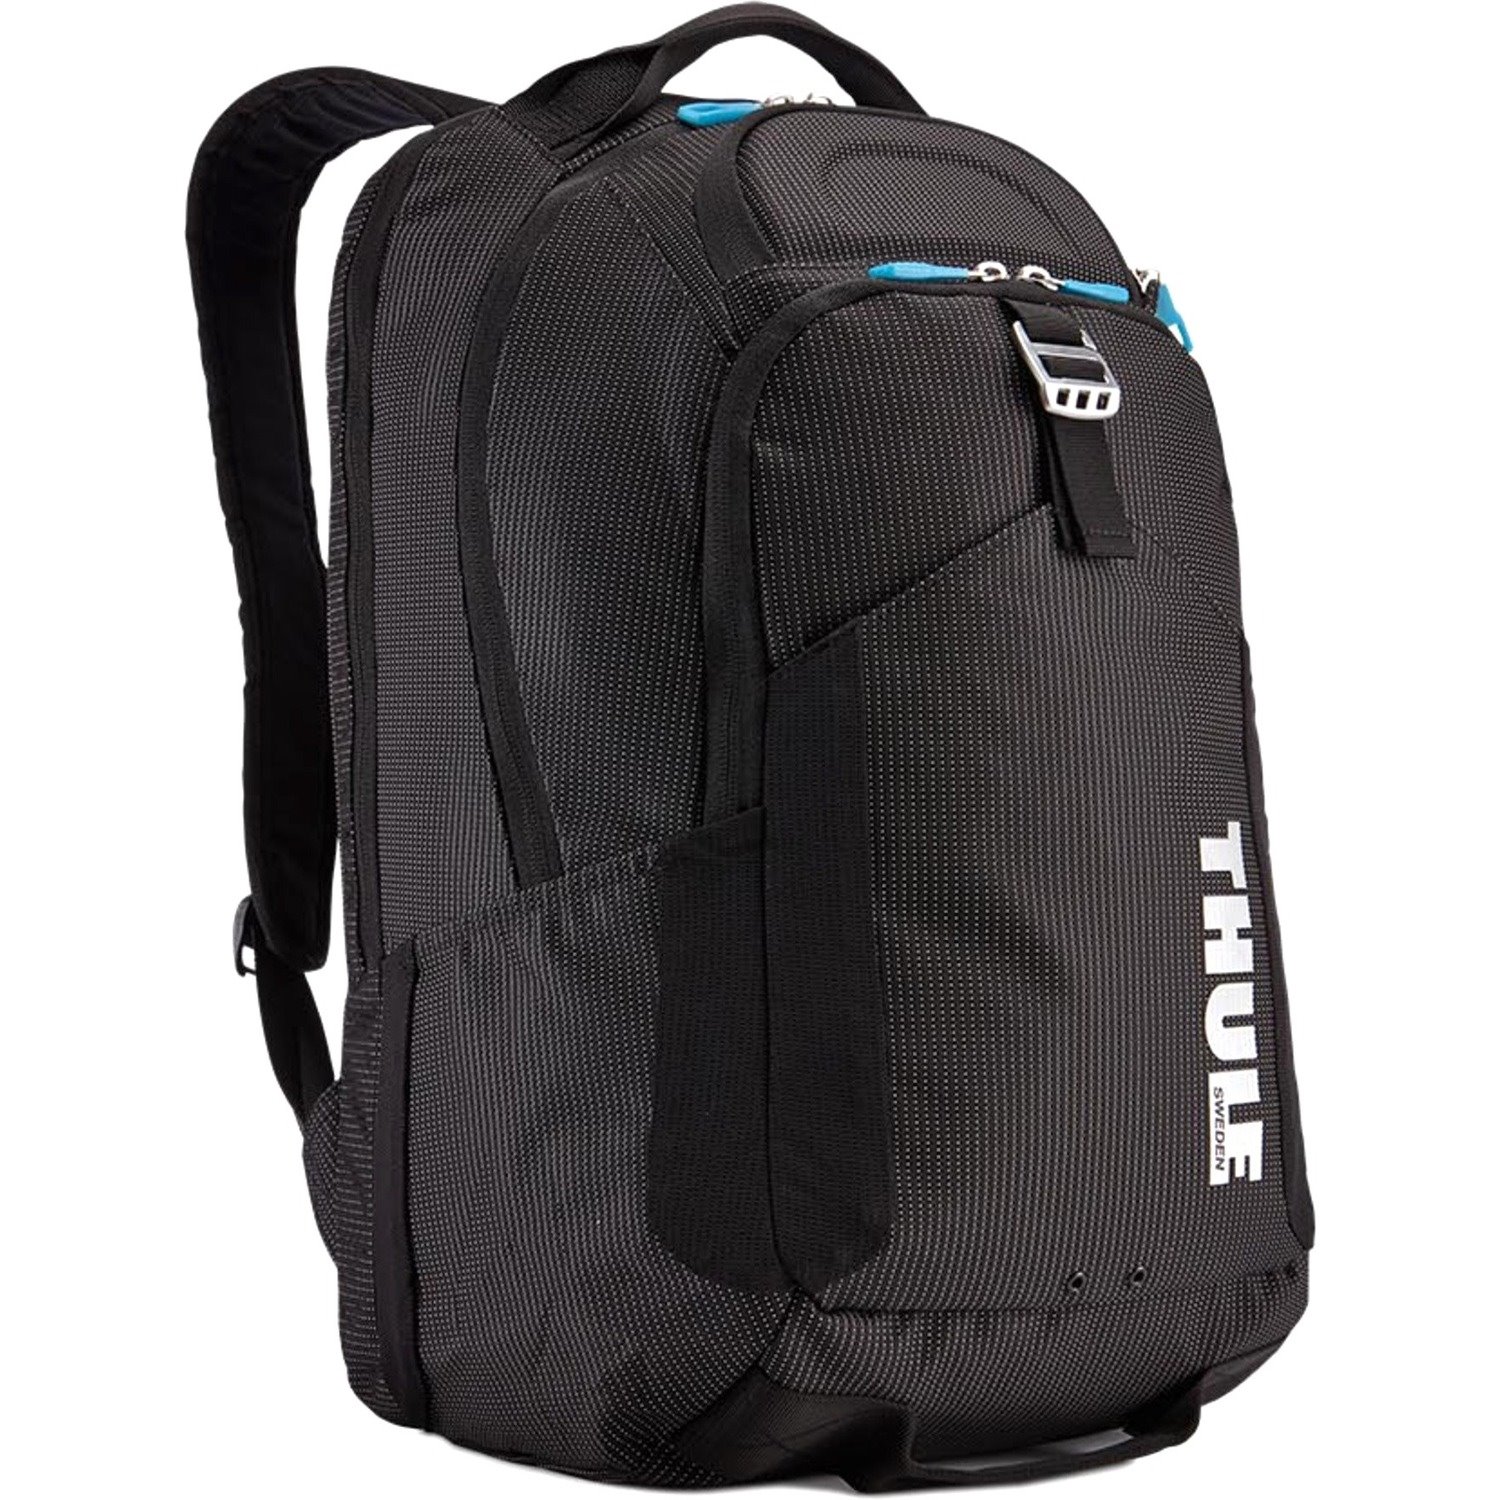 Thule Crossover Carrying Case (Backpack) Accessories, Water Bottle, Notebook, Tablet PC - Black